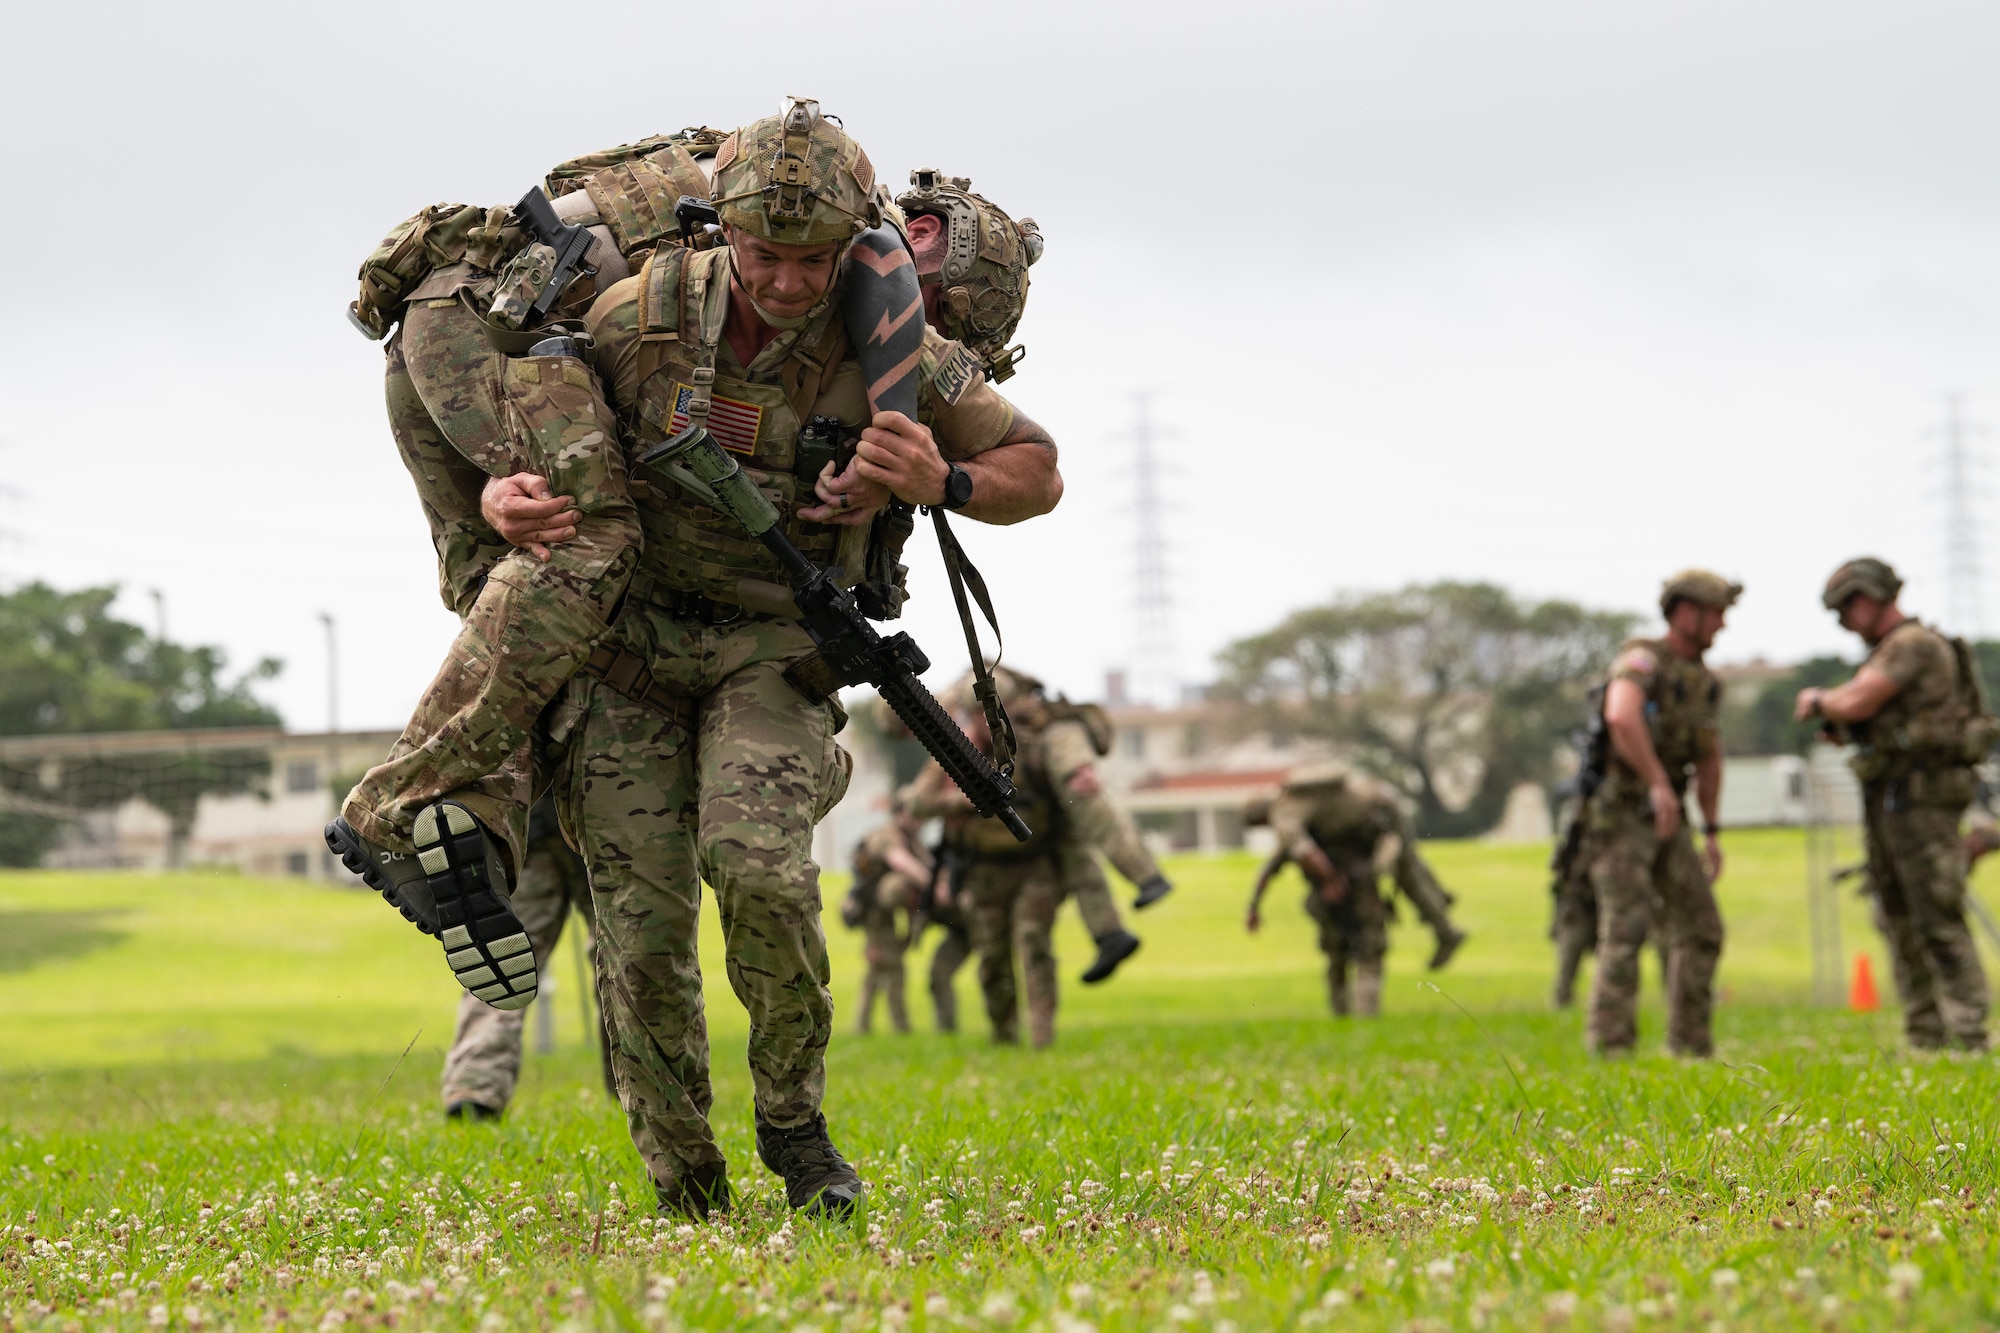 U.S. Air Force special tactics Airmen with the 320th Special Tactics Squadron conduct a buddy carry during Monster Mash, an operational readiness and resilience training, at Kadena Air Base, Japan, May 5, 2023. The Airmen were presented with multiple tasks throughout the seven mile route, including a humvee push, litter carries and fast rope insertions, all while wearing a full ensemble of body armor, weapons and equipment. (U.S. Air Force photo by Staff Sgt. Jessi Roth)